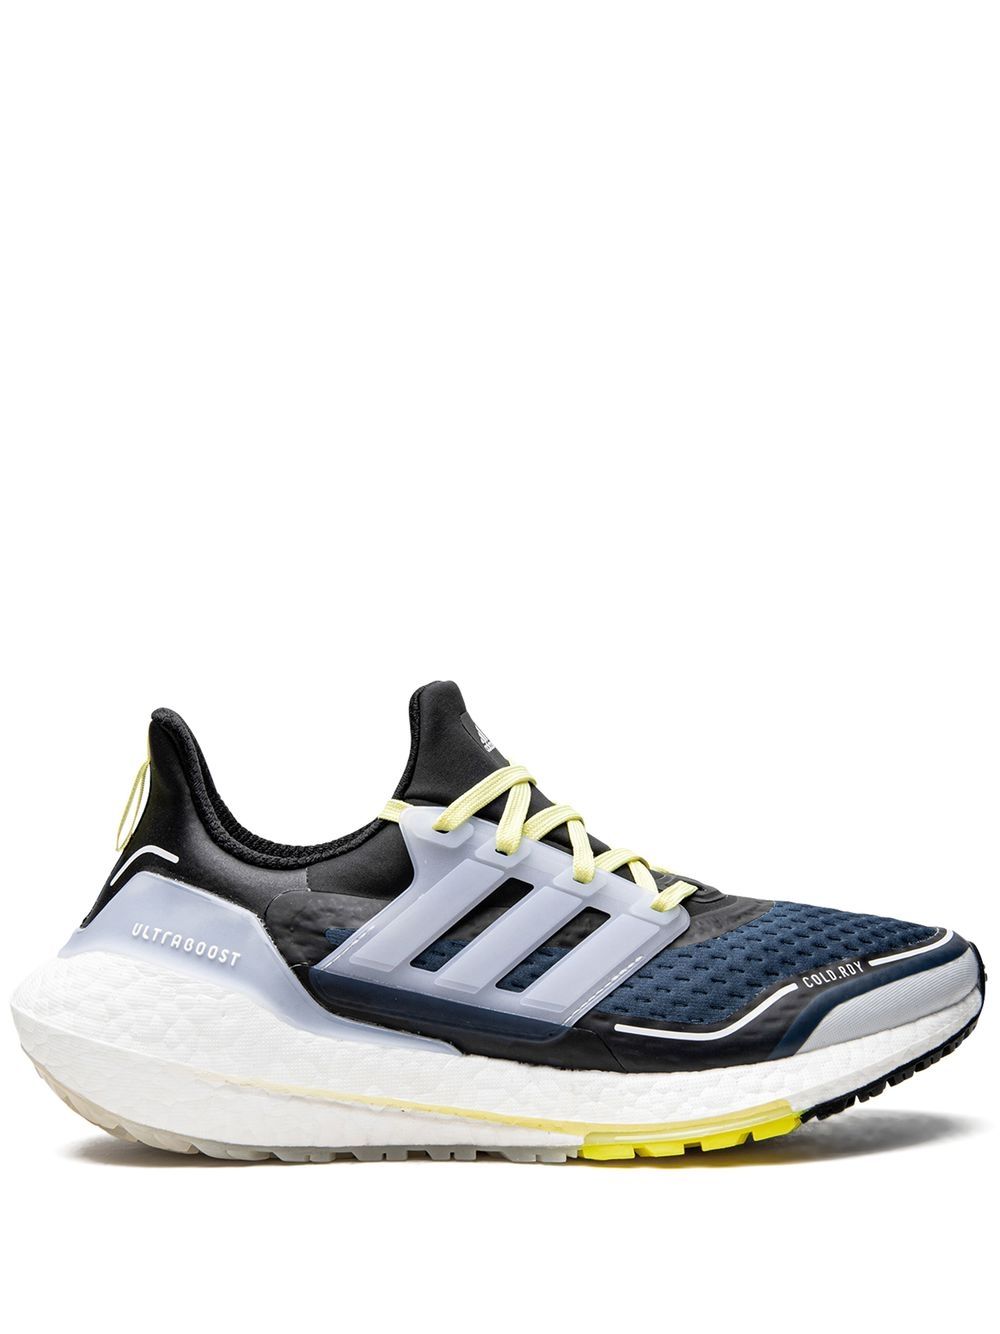 adidas Ultraboost 21 C.Rdy "Cre Navy/Halblue/Pulse Yellow" sneakers von adidas